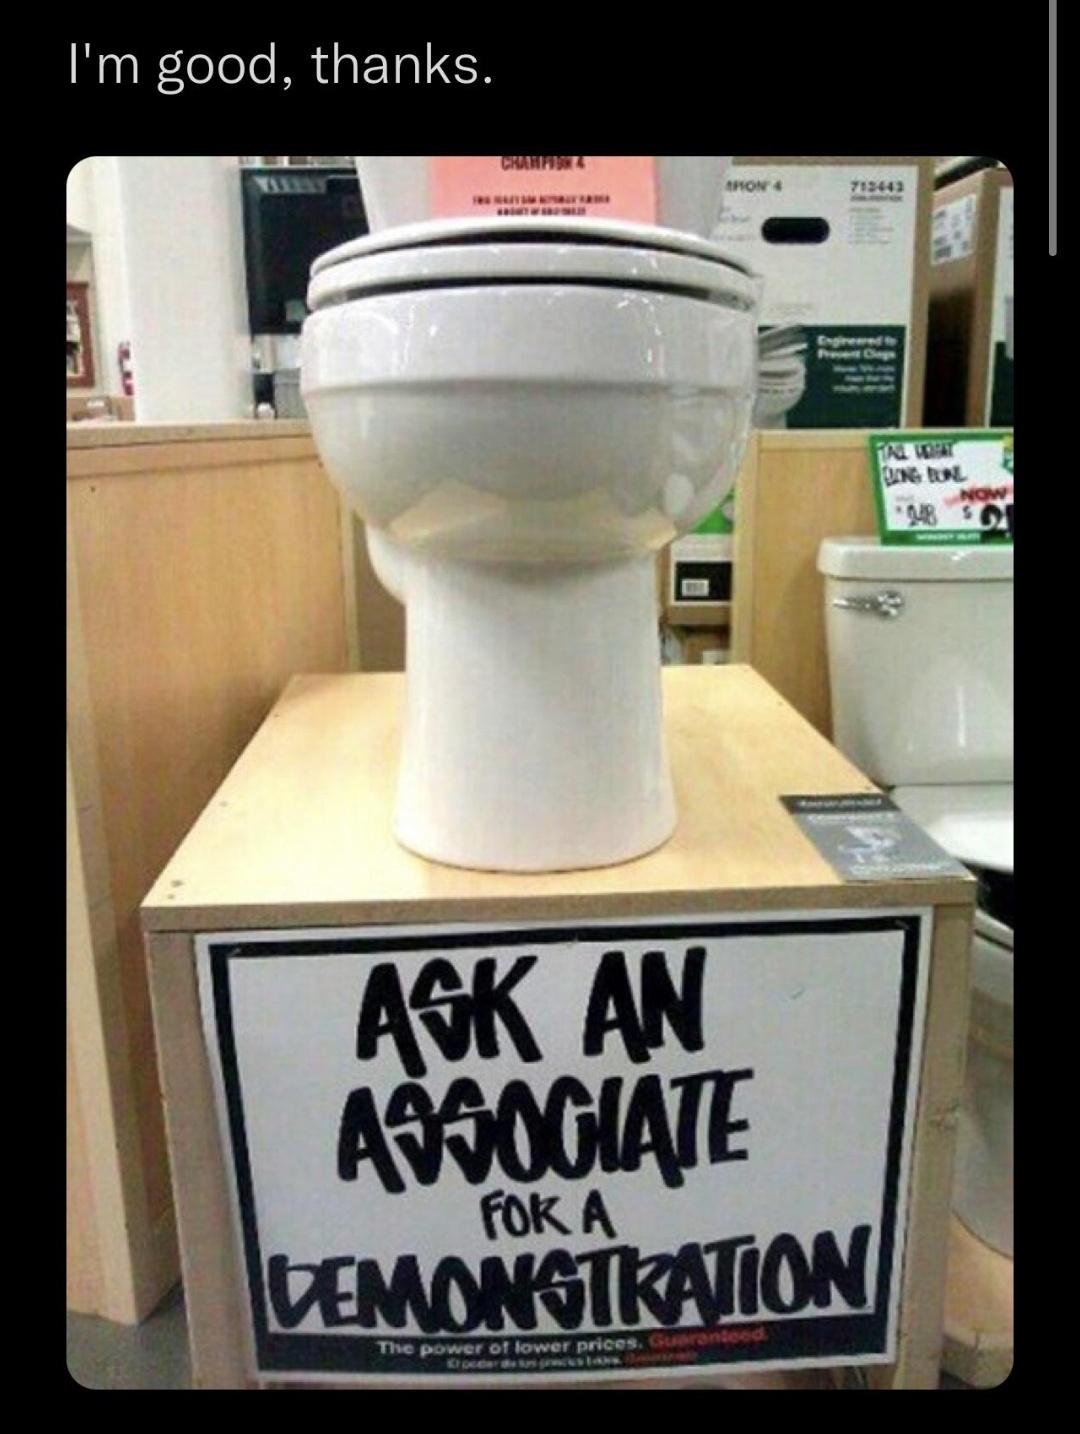 home depot toilet funny - I'm good, thanks. Cria Aron 713443 Tat Oxual Now 248 S Ask An Asociate Demonstration Fok A The power of lower prices. Guaranteed